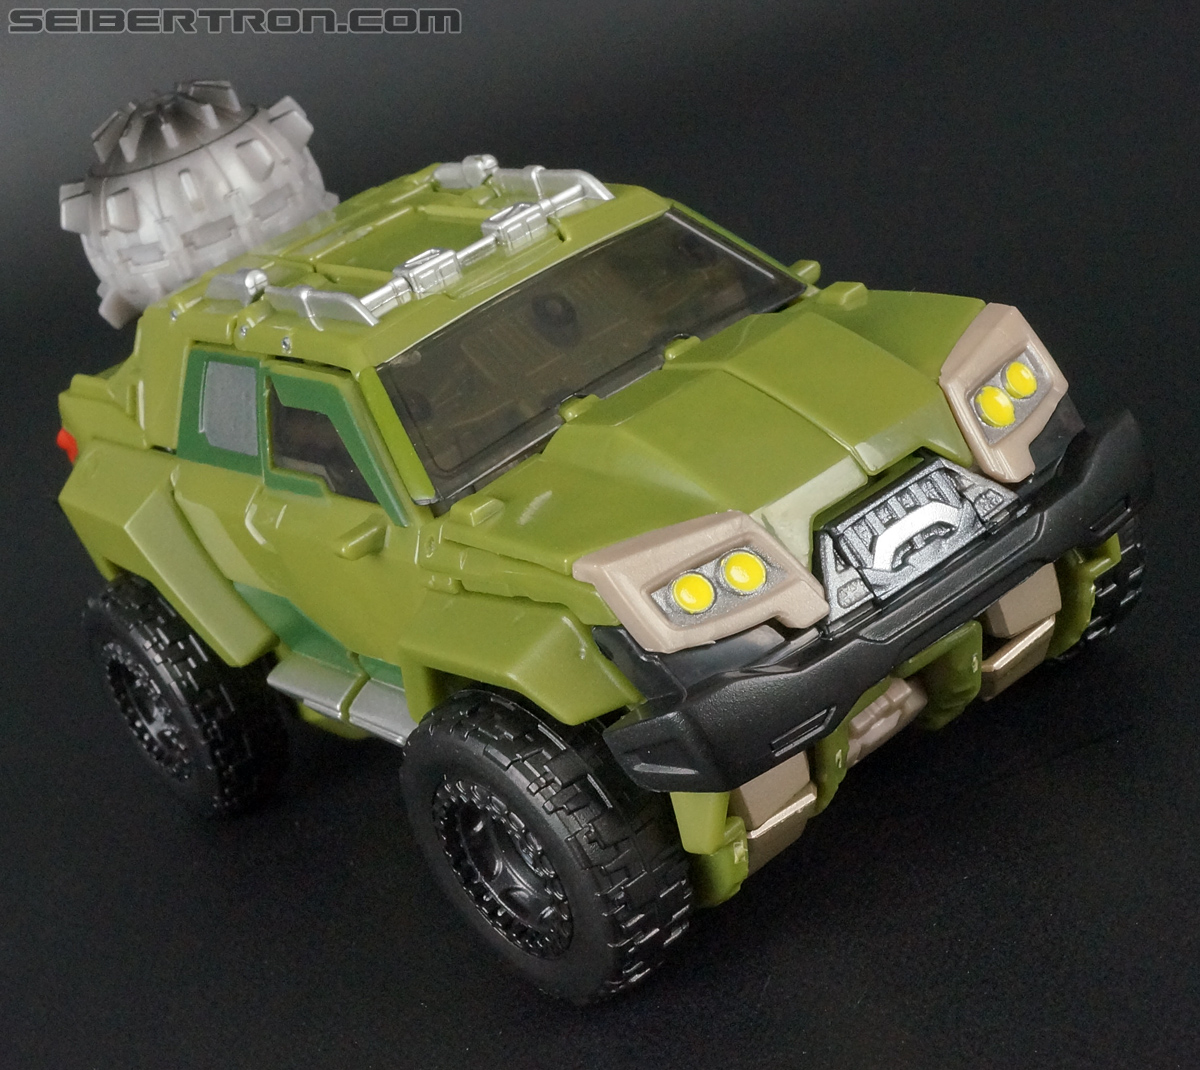 Transformers Prime: First Edition Bulkhead (Image #27 of 173)